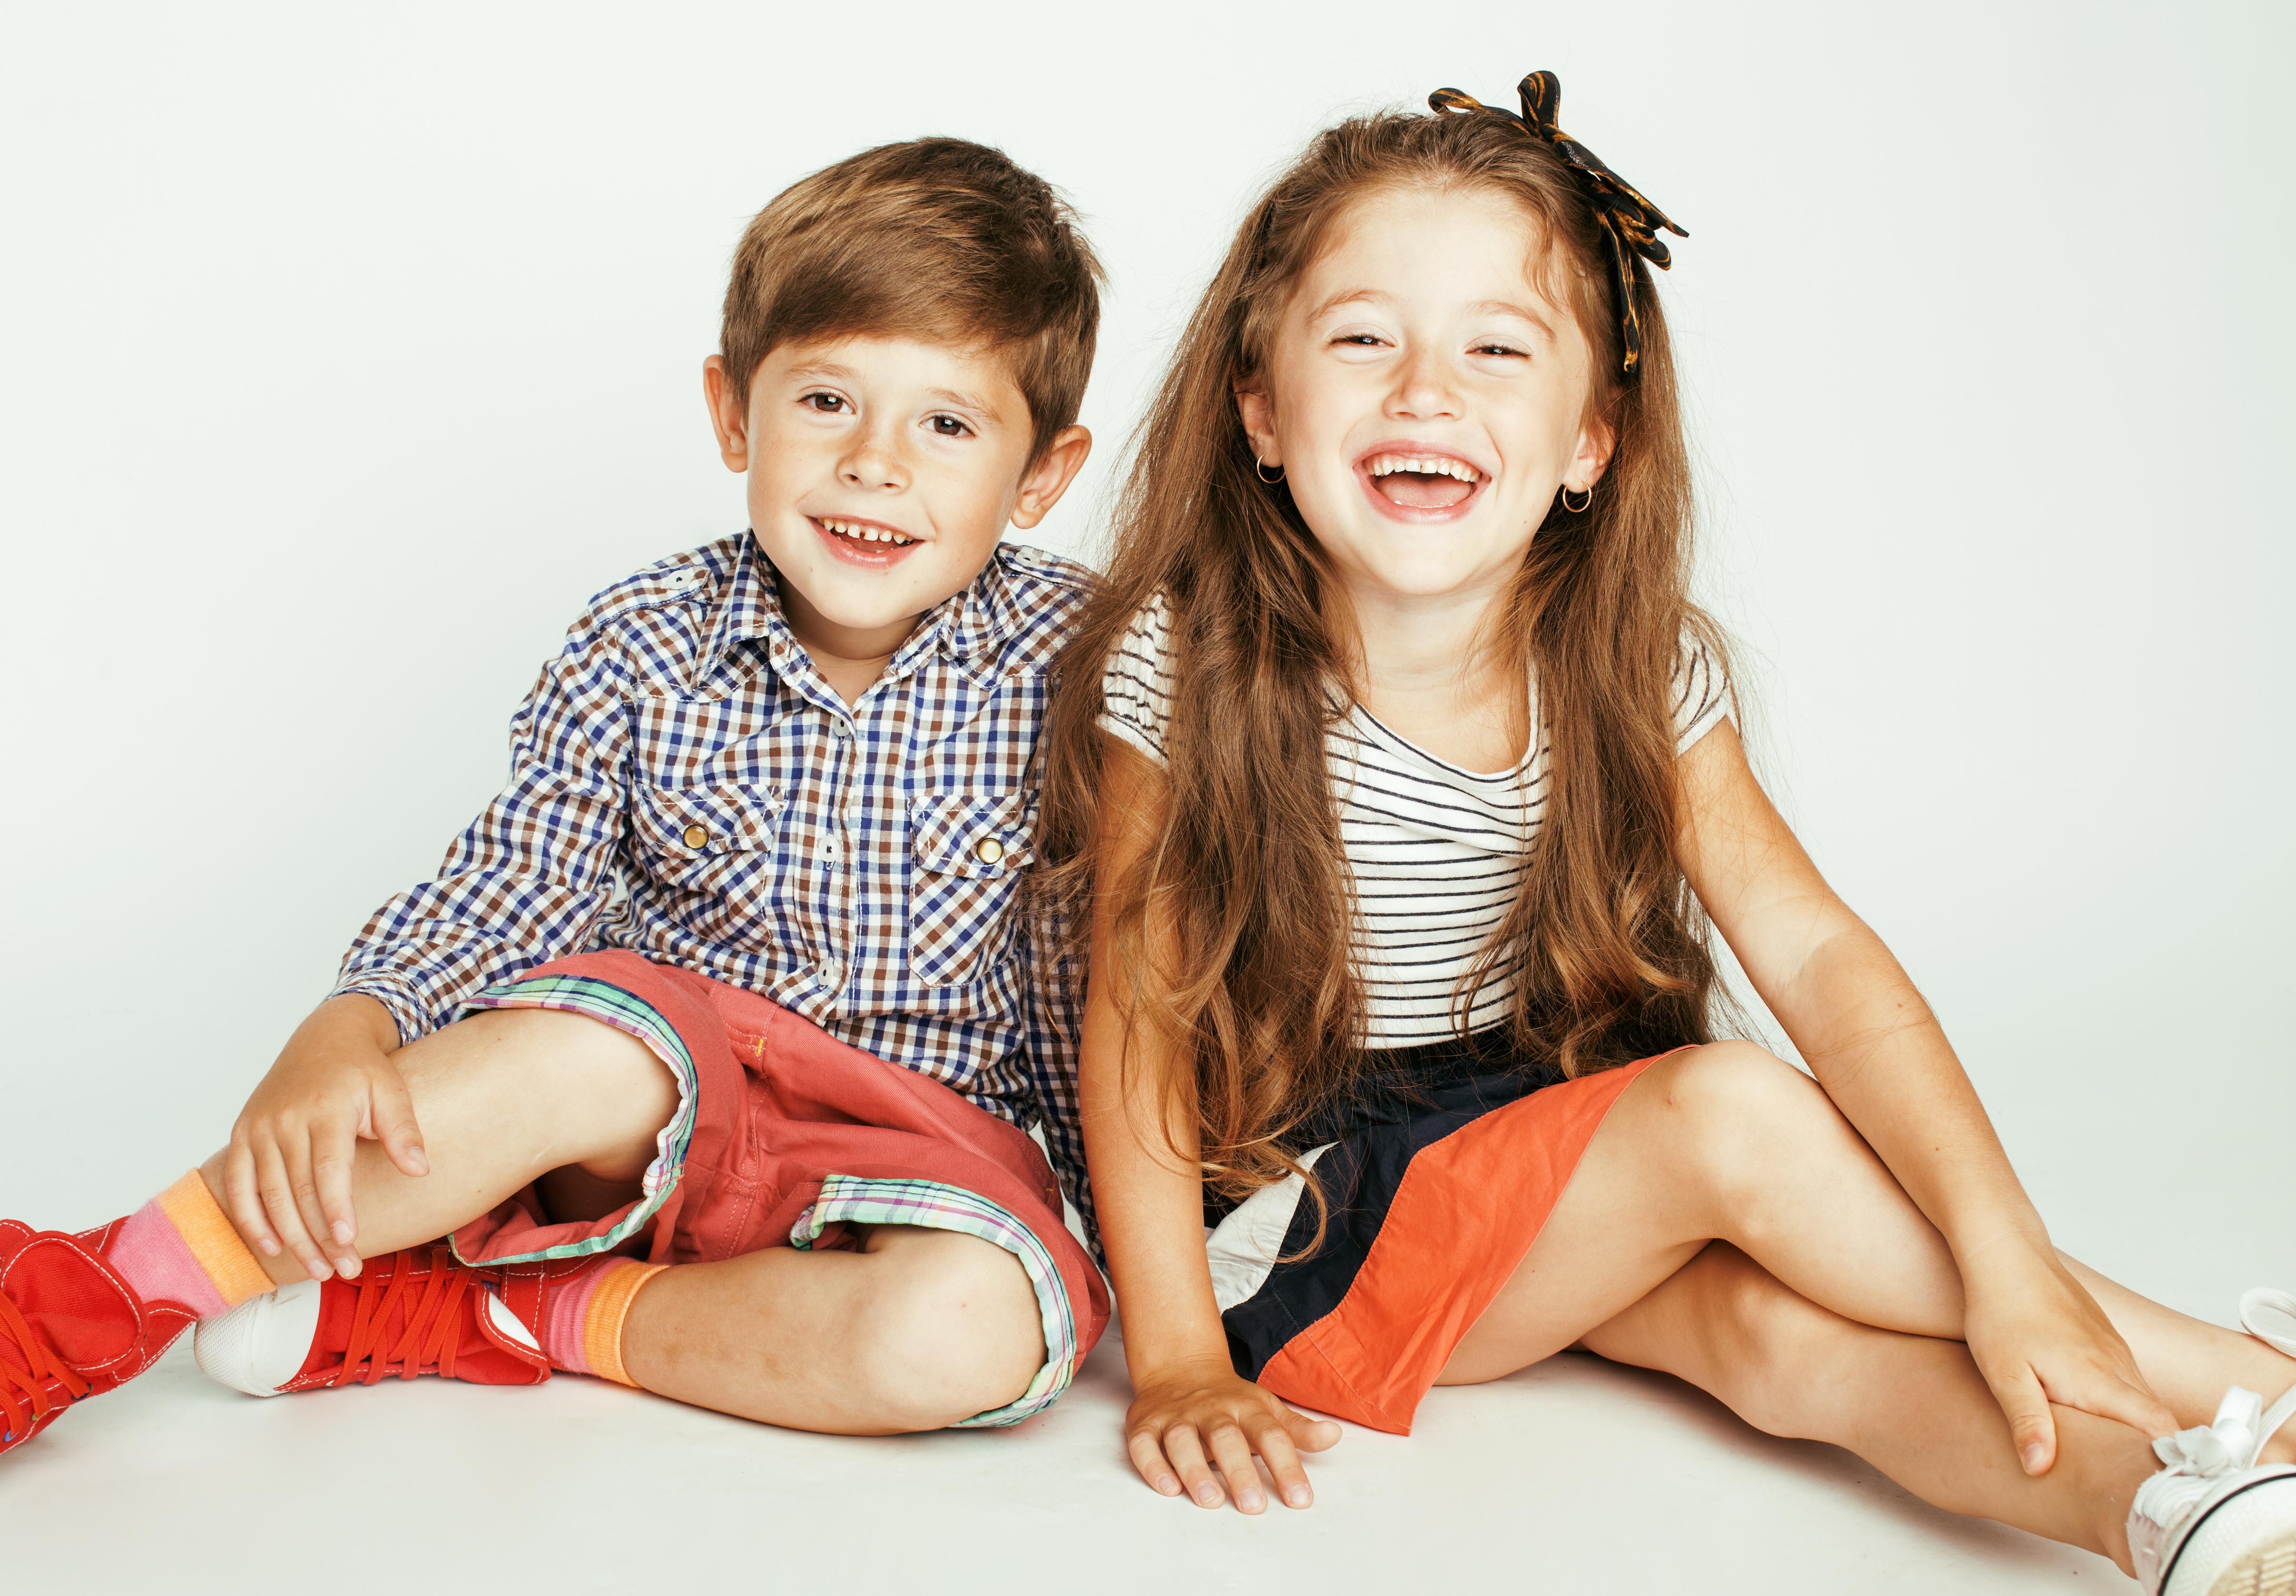 The woman thought the kids were twins because of how they resembled each other. | Source: Shutterstock